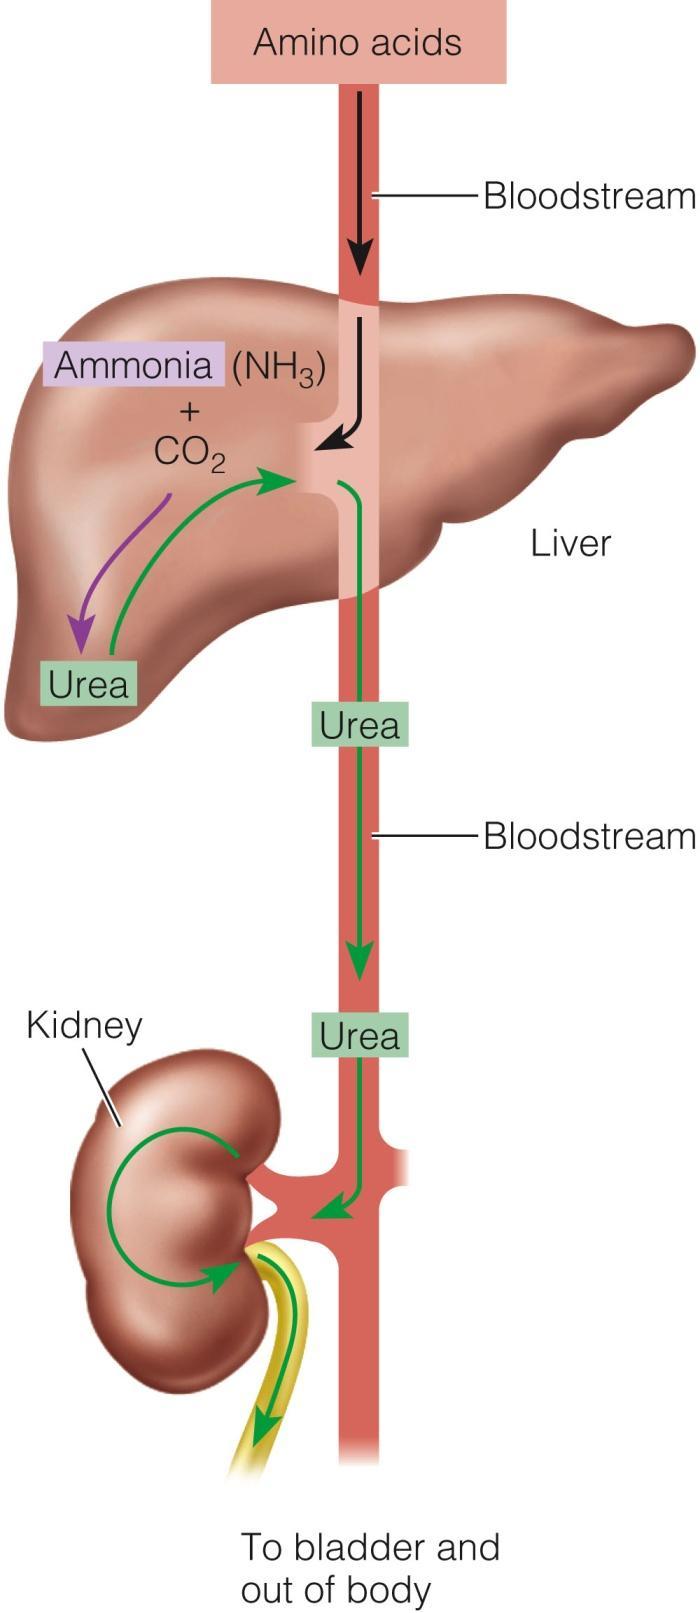 Urea Excretion Liver makes urea out of Ammonia (NH3) Urea travels to the kidneys which filter it out and excrete it in